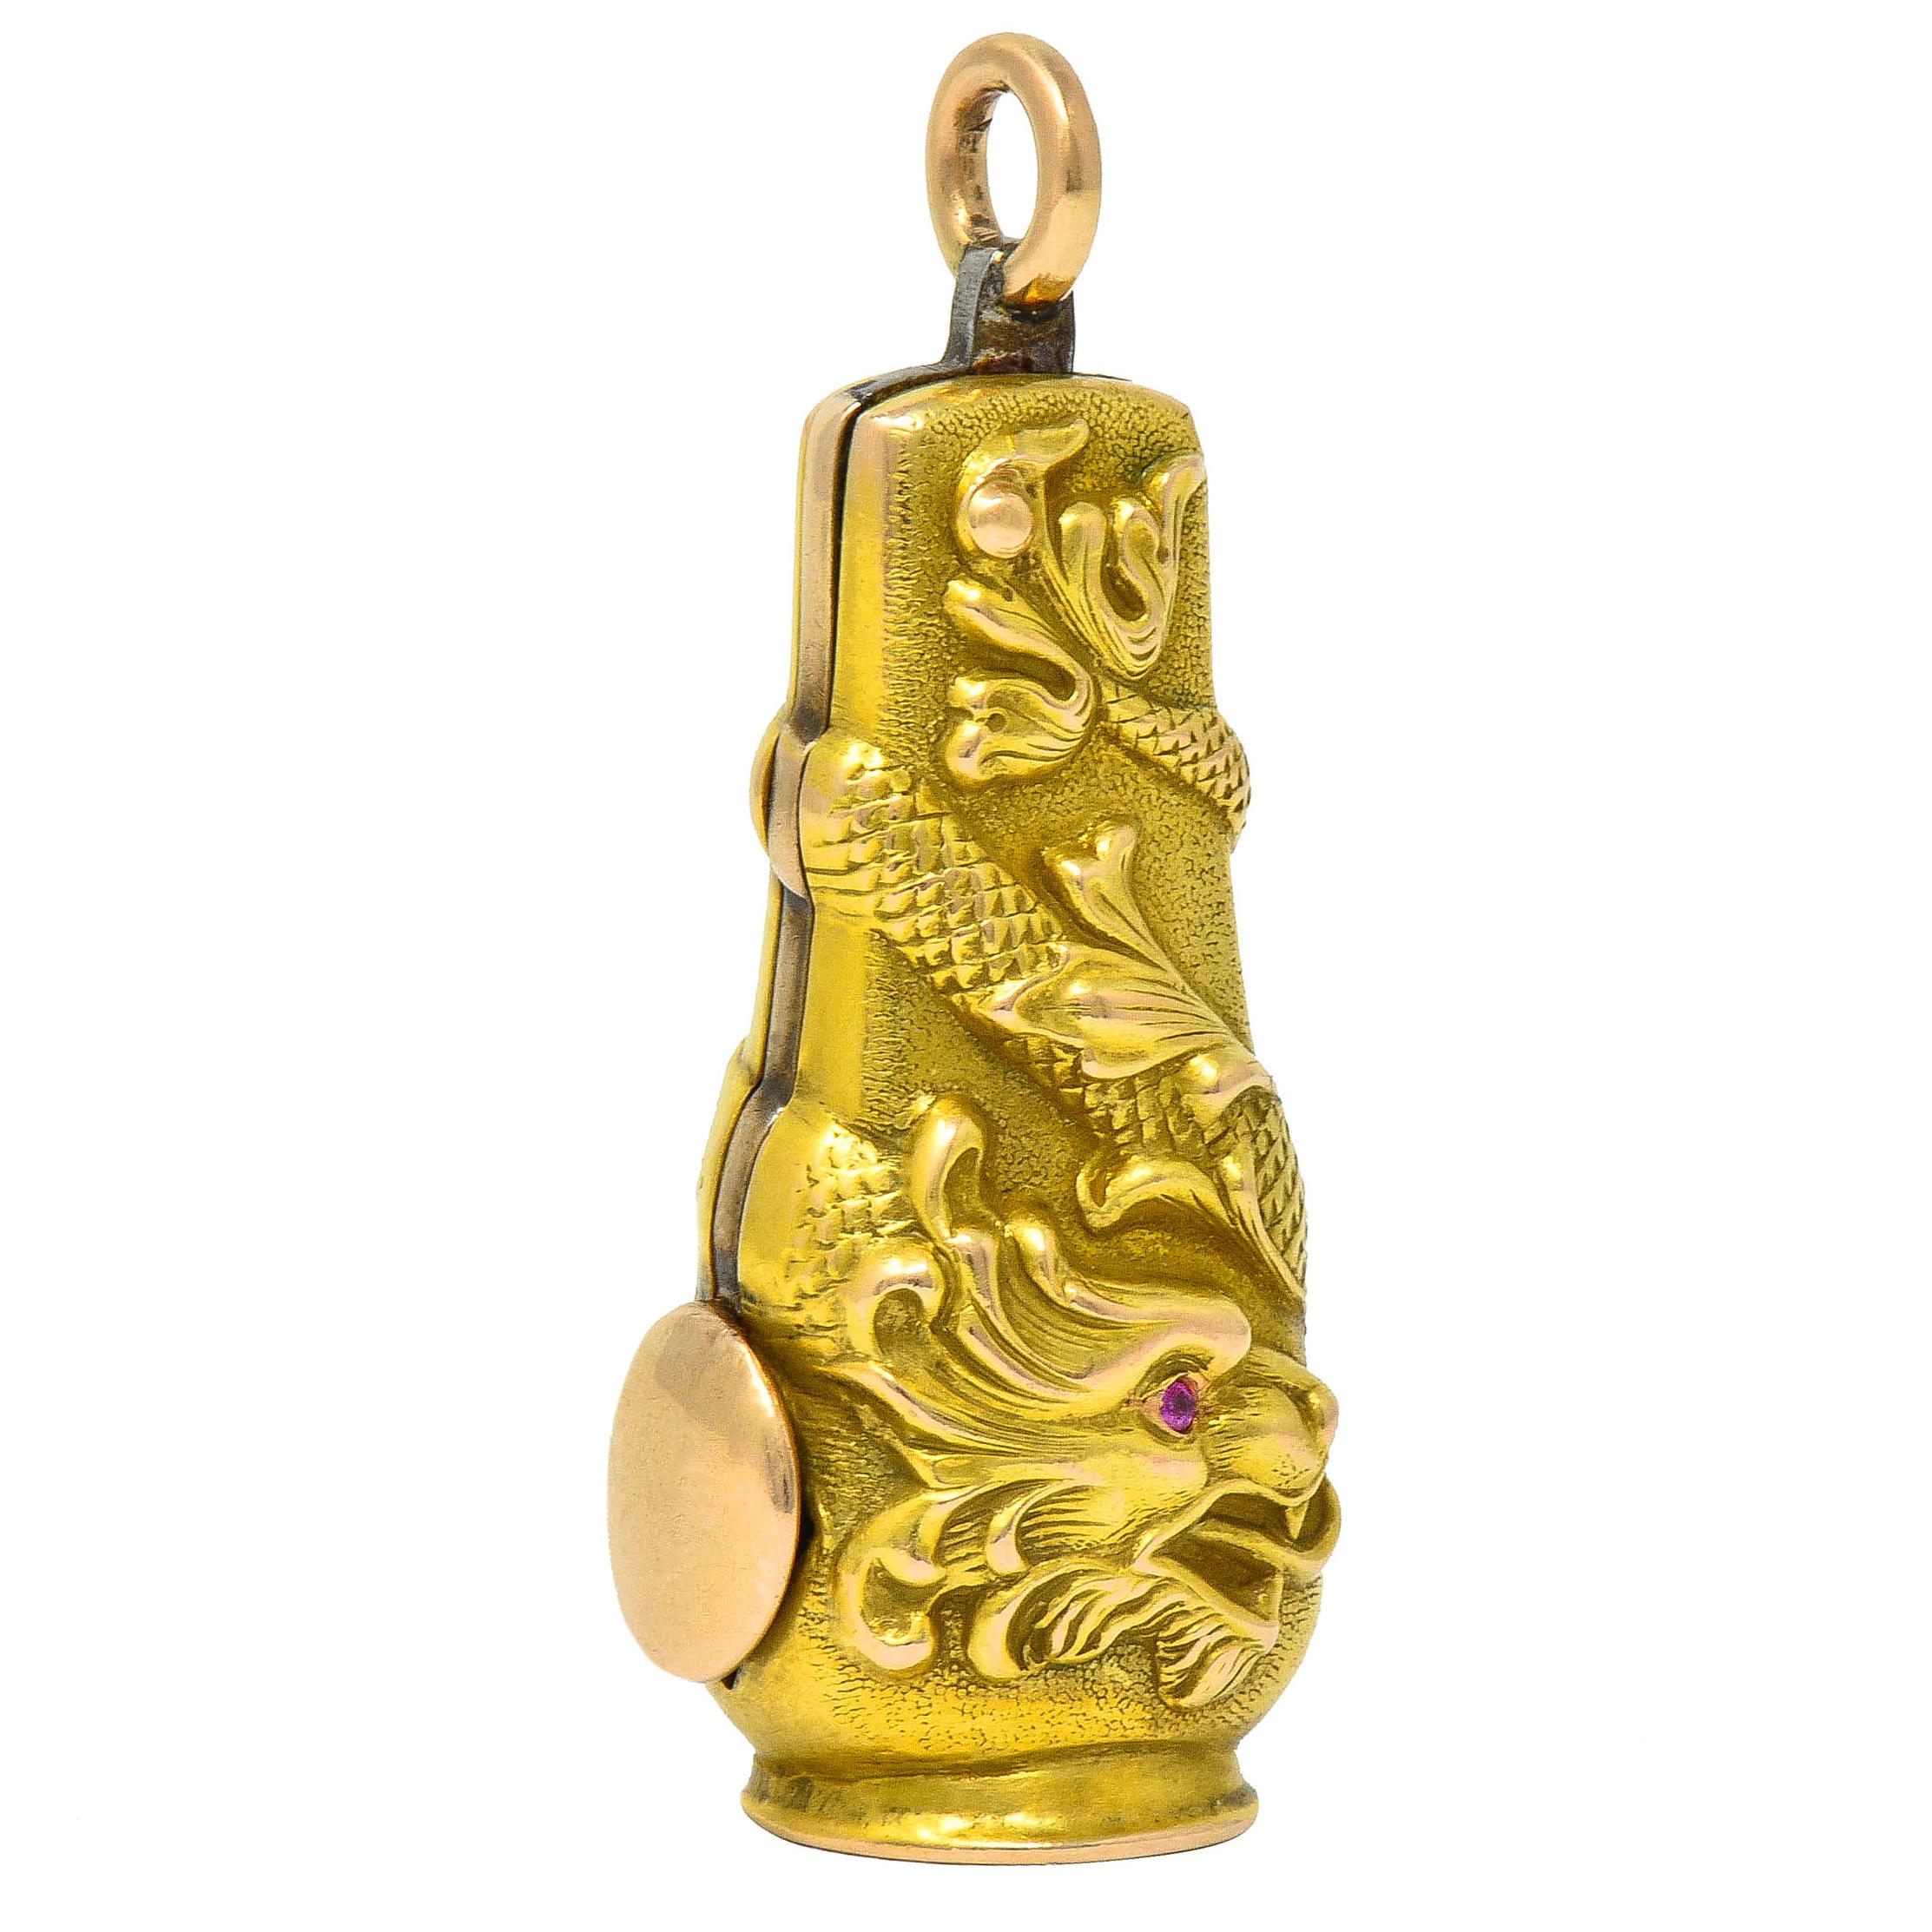 Tubular pendant features a highly rendered serpent dragon design

Its snake-like form wraps fully around the pendant with scale and whiplash details

With two fierce faces accented by ruby accent eyes; purplish-red in color

Terminating as a 10.5 mm